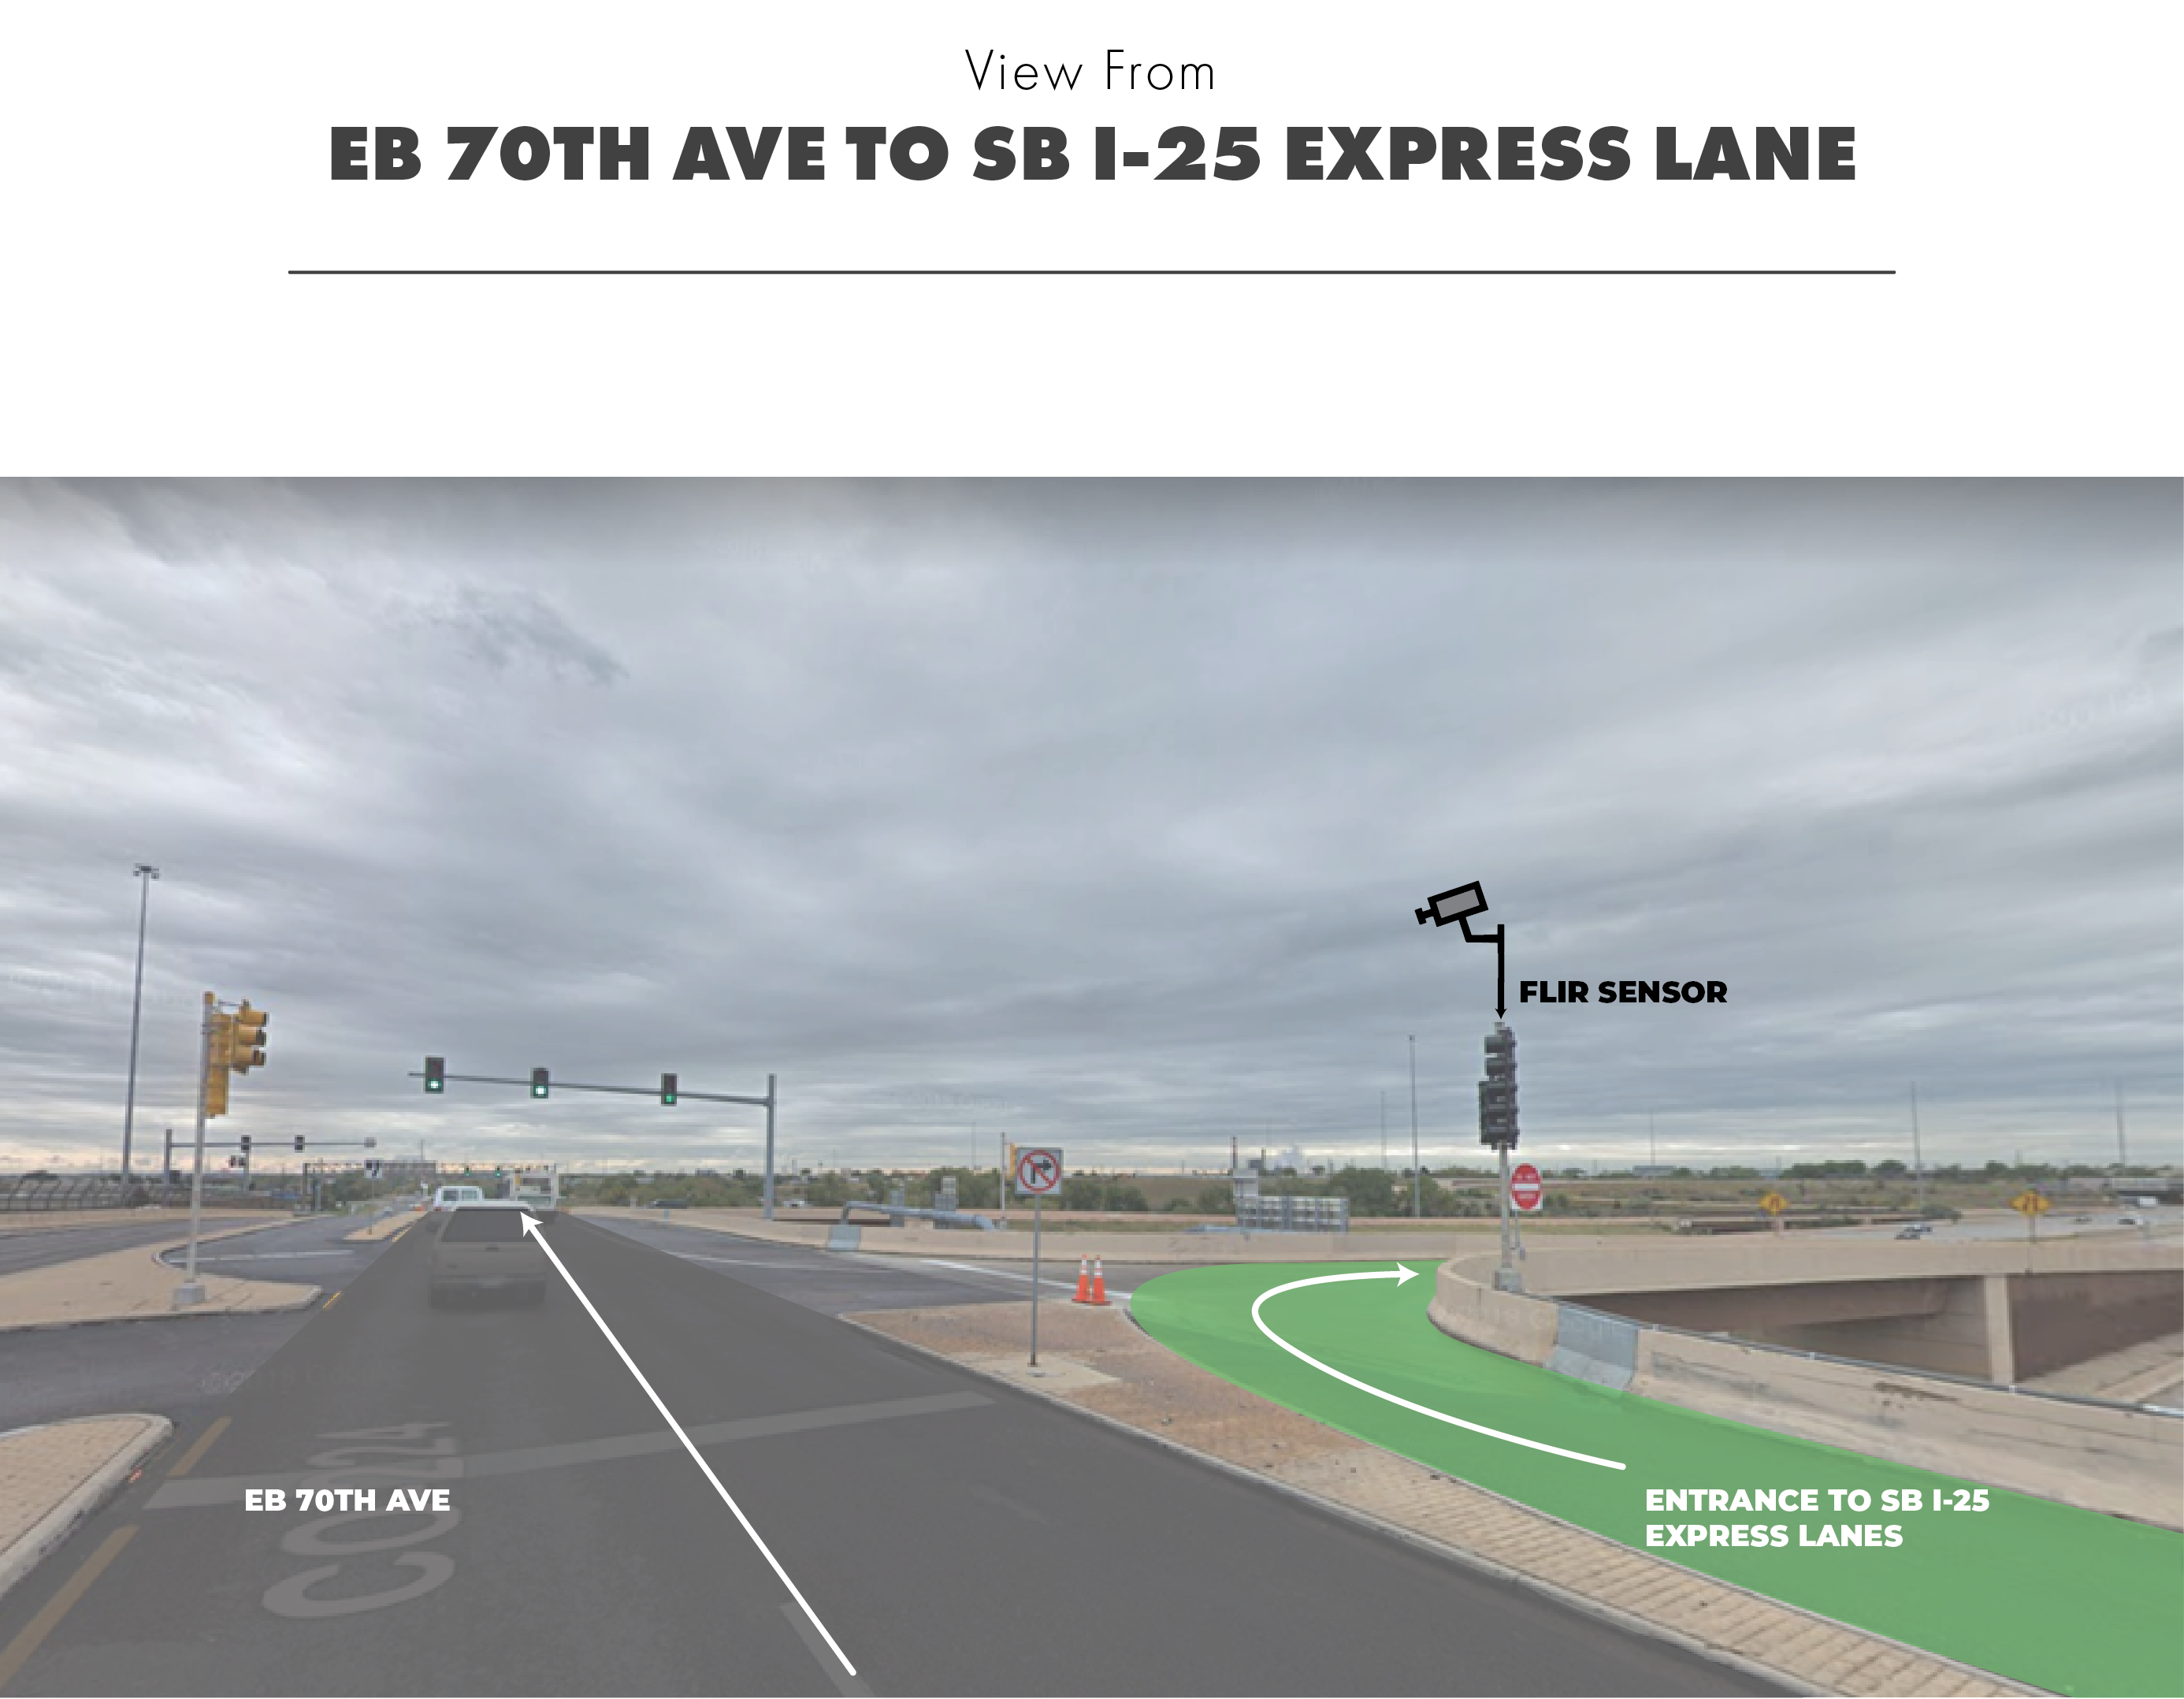 View of Flir Sensor Mount height at I-25 and I-70 juncture on wrong way detection